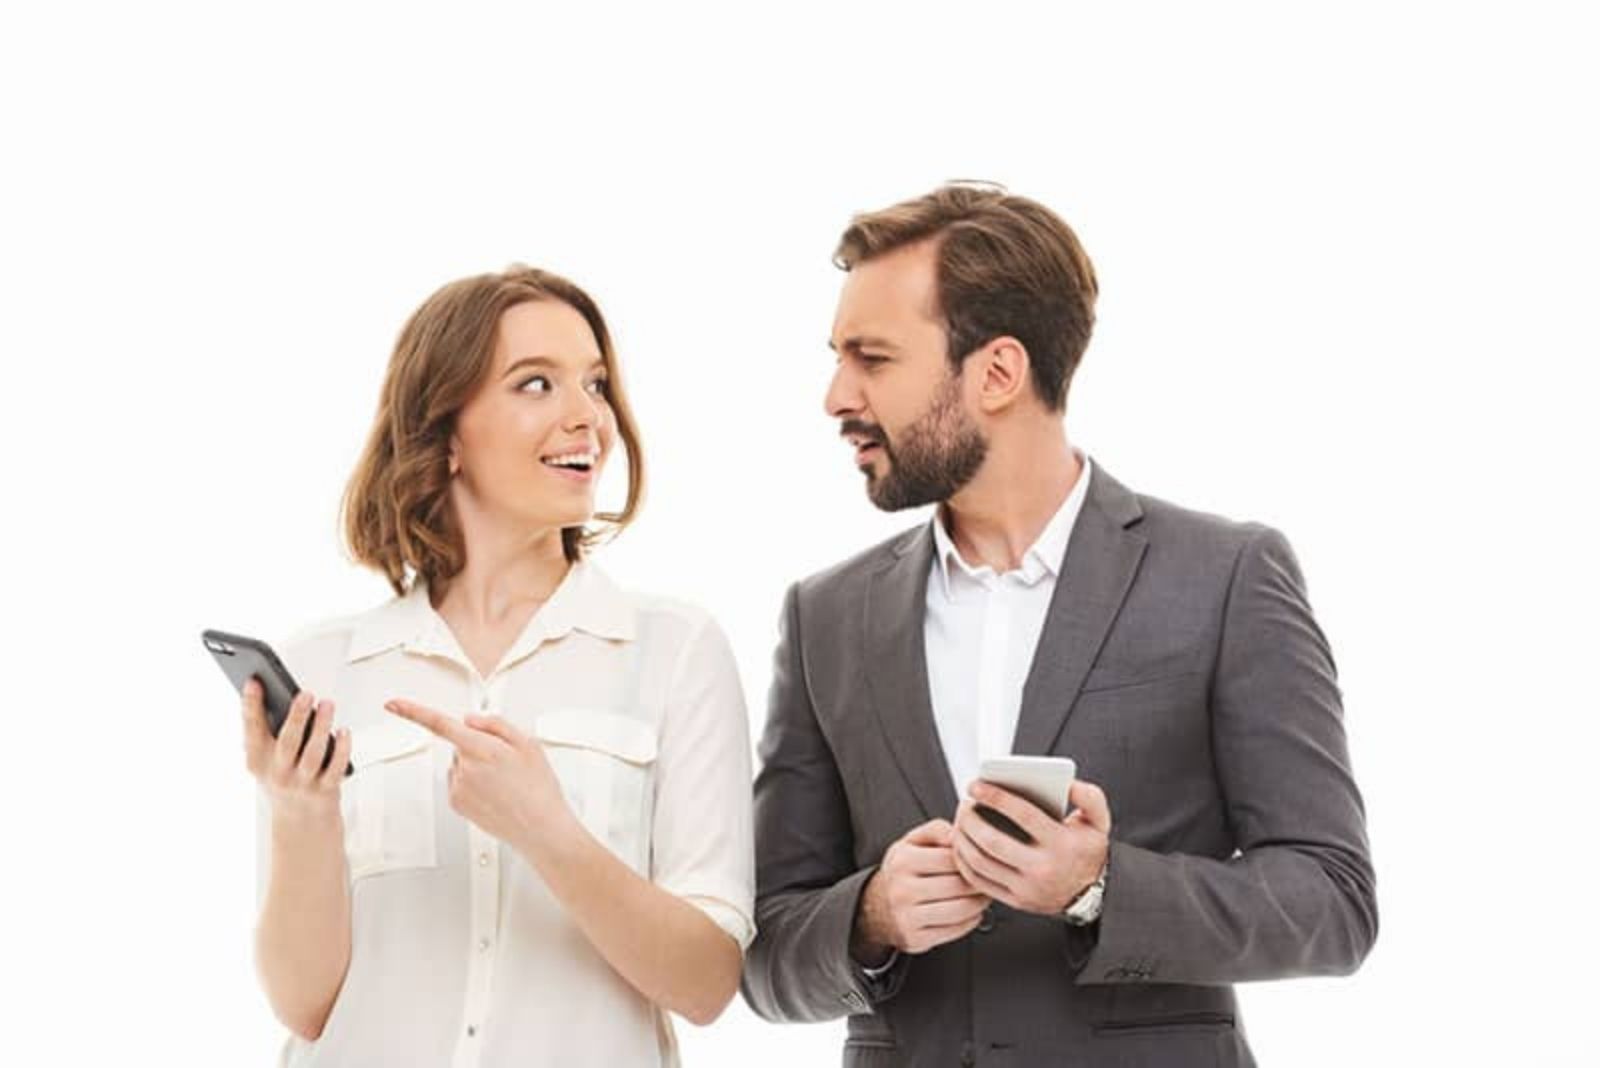 a man and a woman hold phones in their hands while a man looks at a woman in confusion